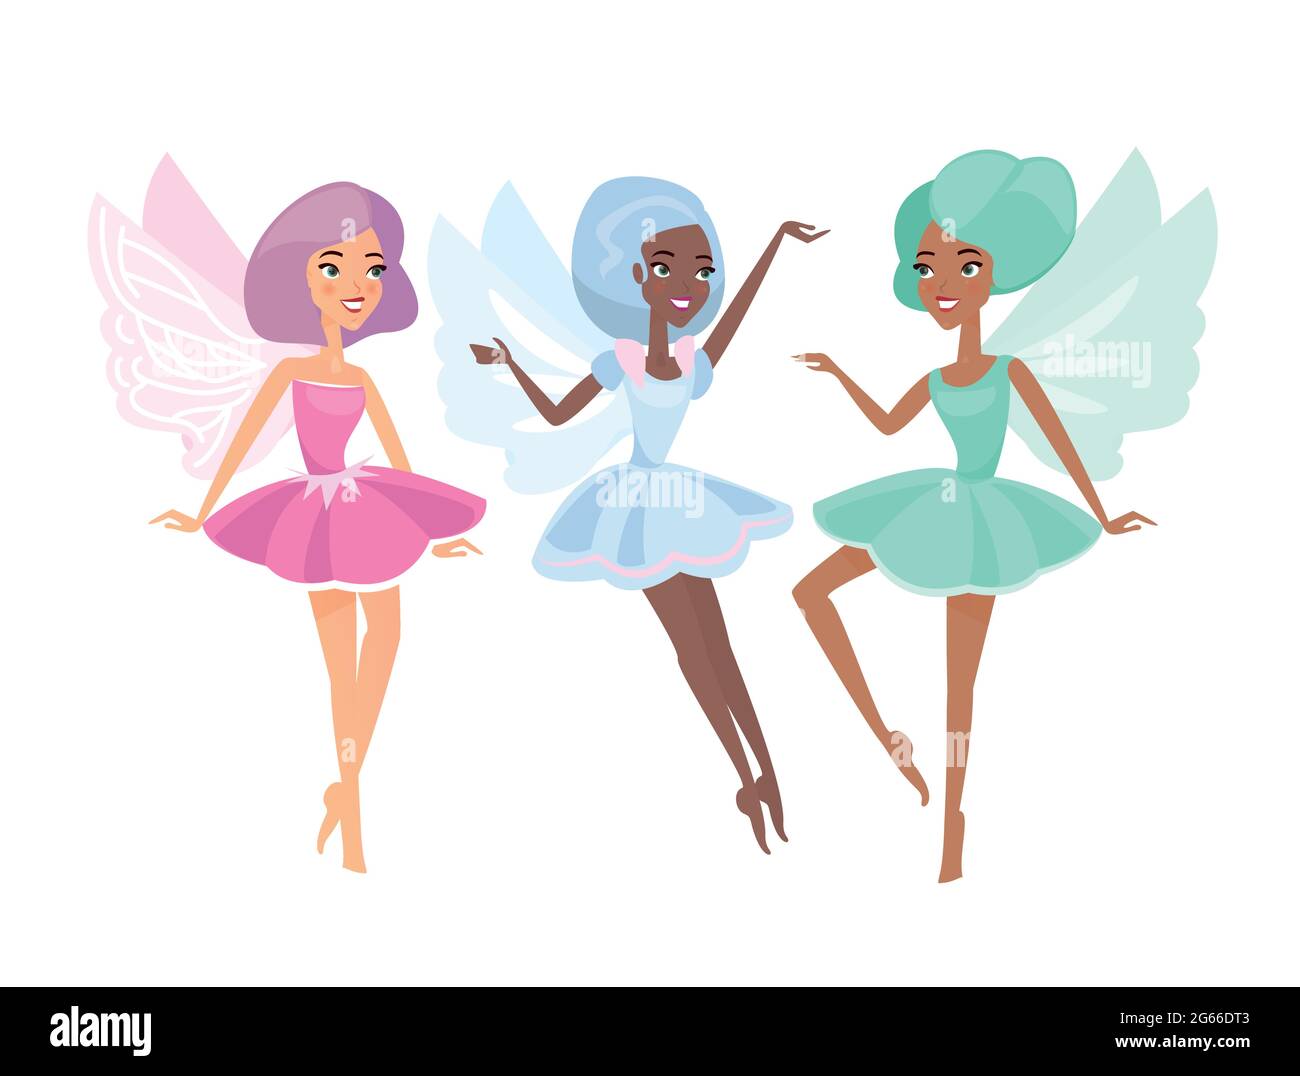 Mythical fairies flat vector illustrations set. Cute fairytale creatures isolated on white background. Magical flying elves. Cartoon mulatto girls Stock Vector